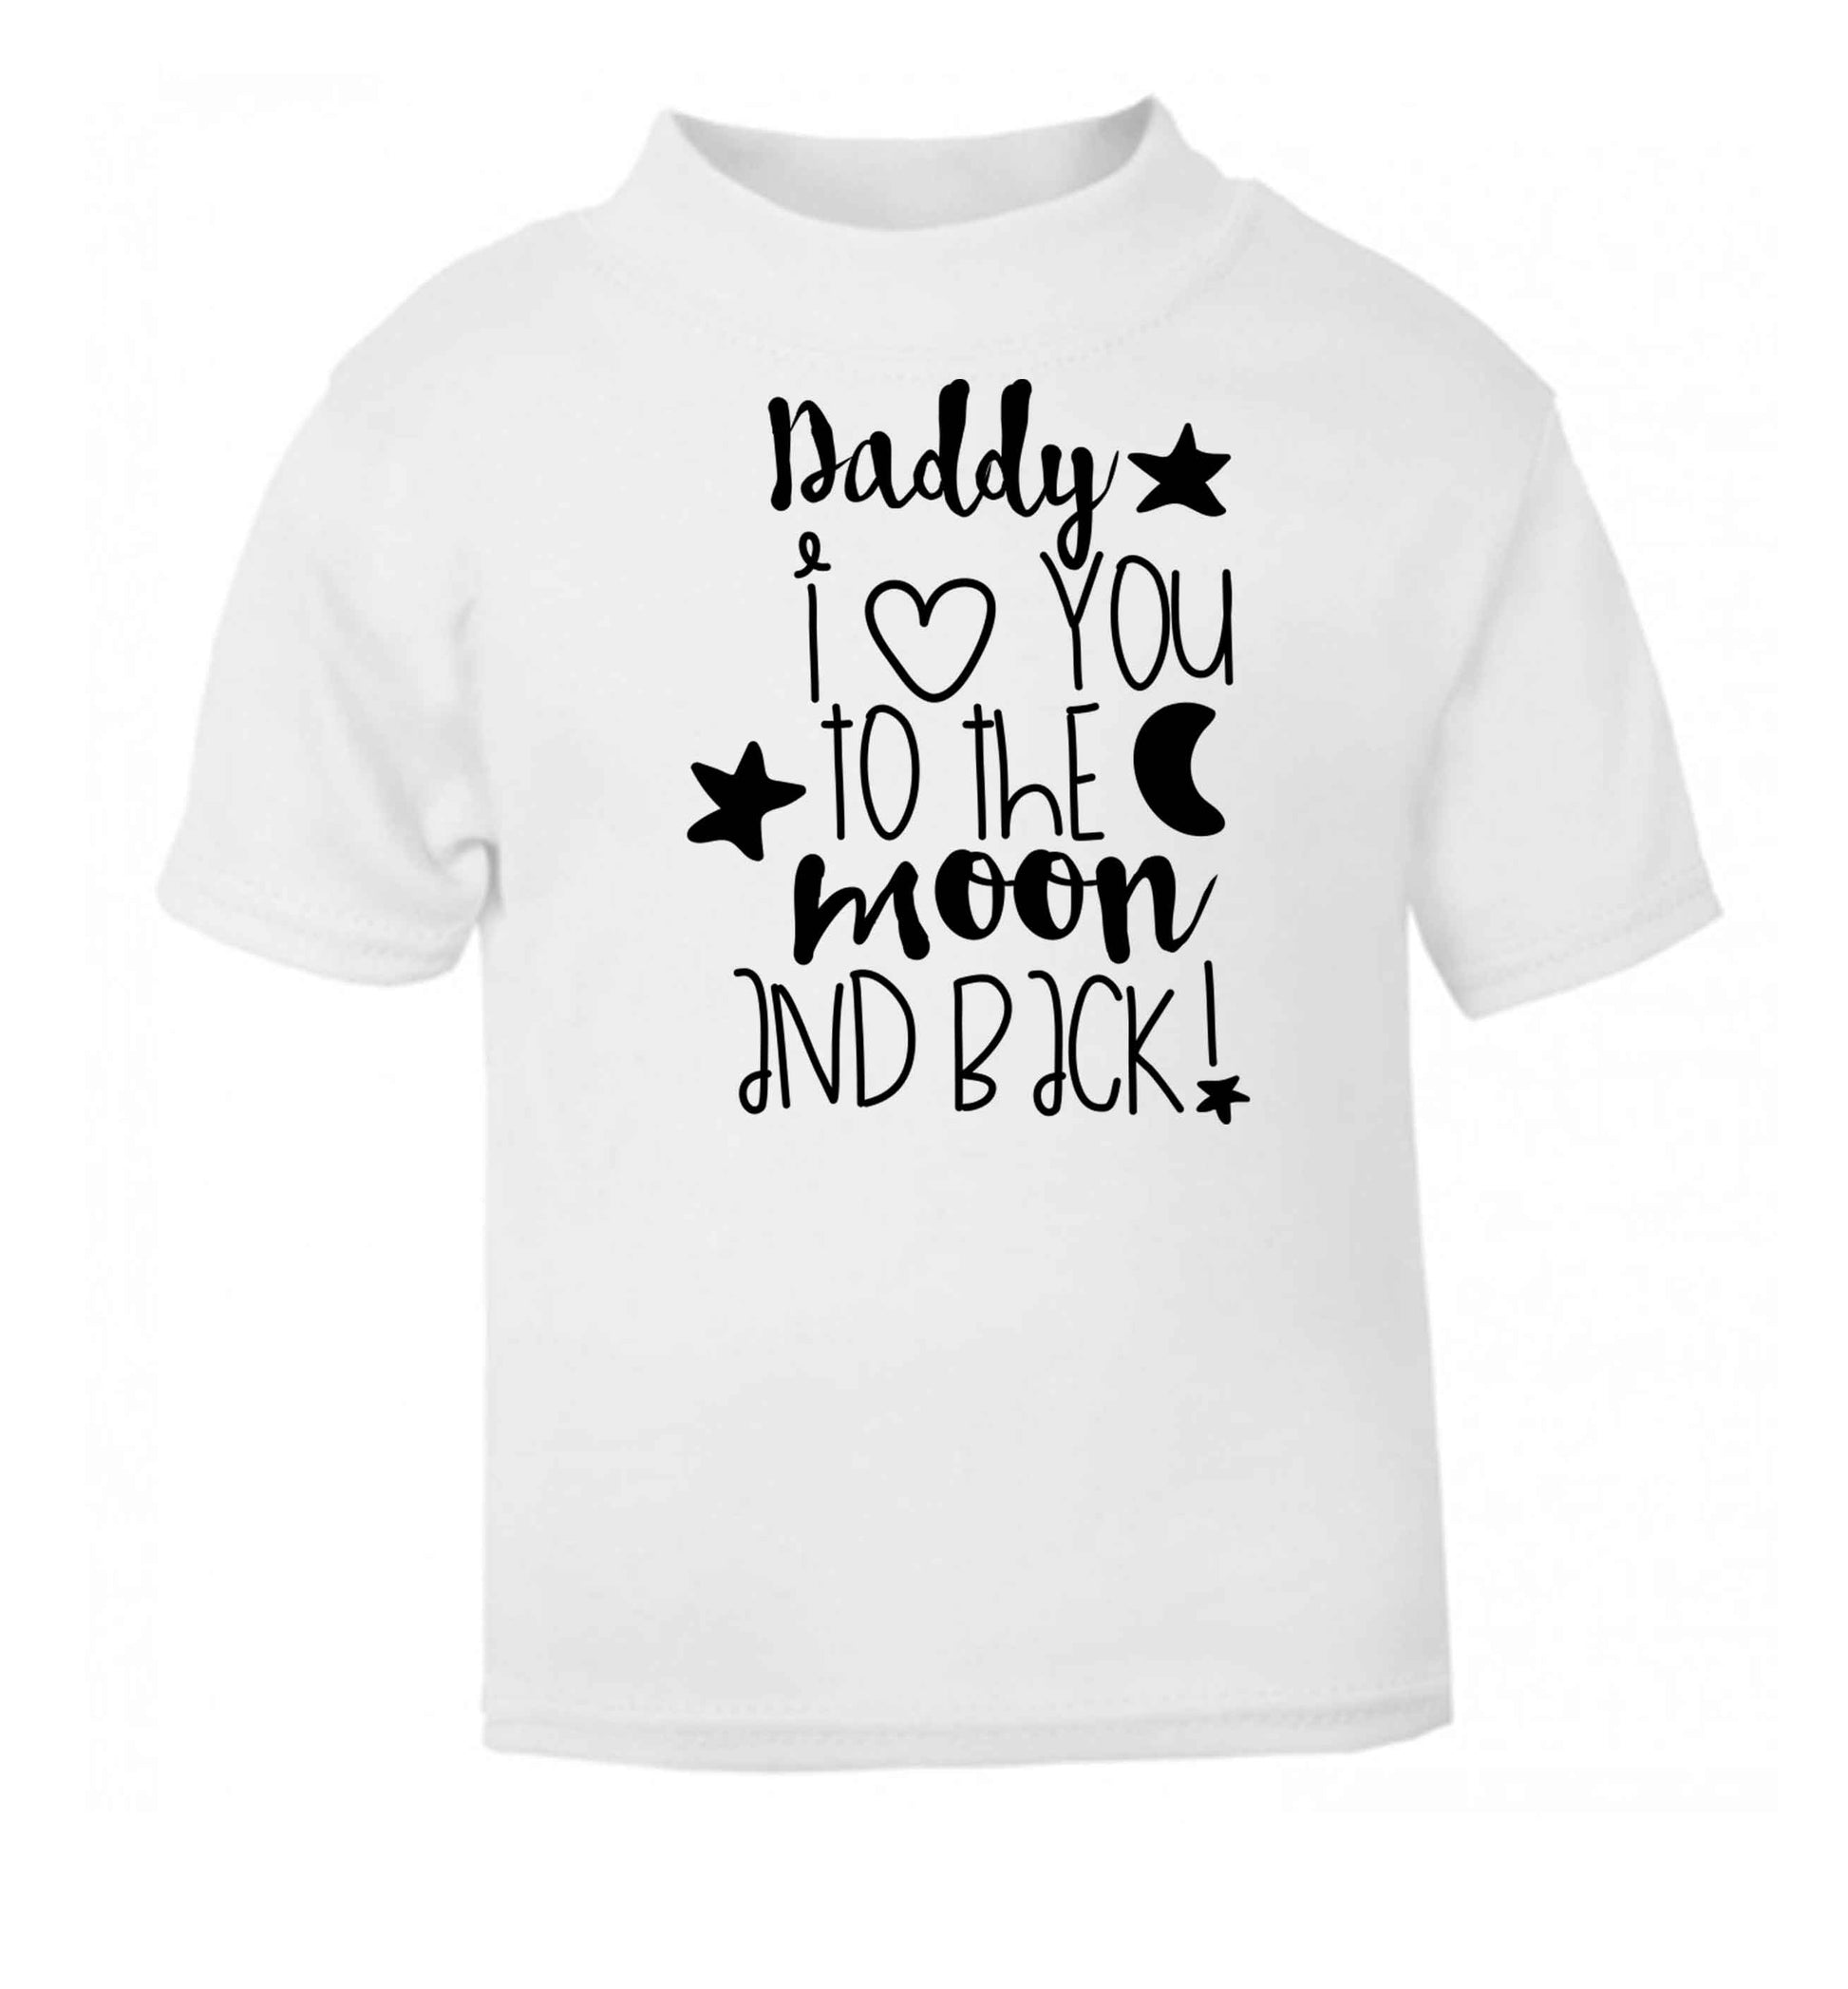 Daddy I love you to the moon and back white baby toddler Tshirt 2 Years